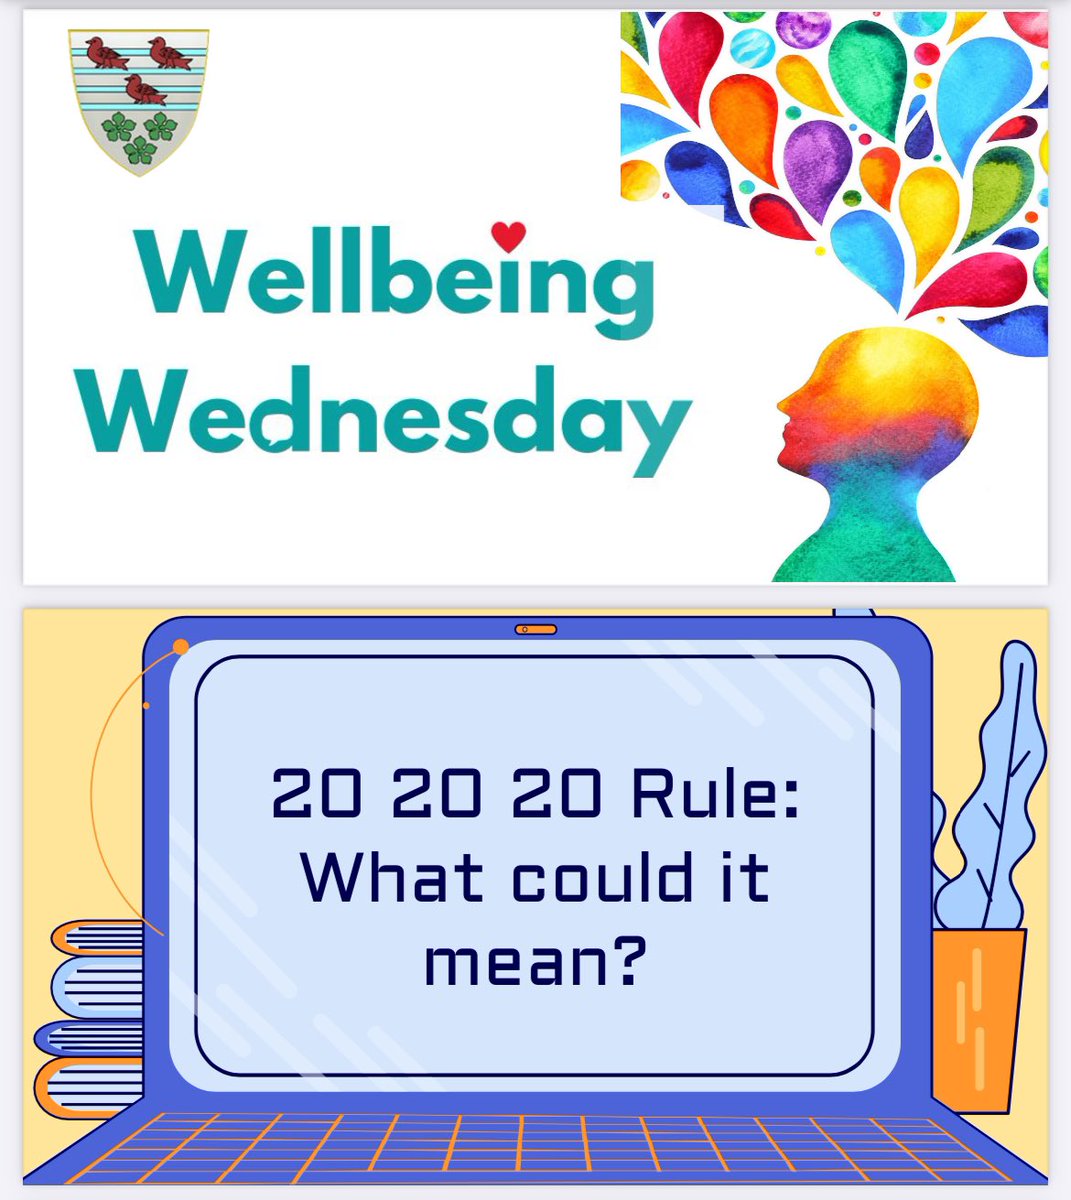 This week’s Wellbeing Wednesday @YsgolGreenhill is the importance of the 20-20-20 rule. 
After 20minutes using a screen,look at something 20 feet away for 20 seconds- this is how long it takes for our eyes to reset and relax 👀
#teamgreenhill
#wellbeingwednesday
#bluewave